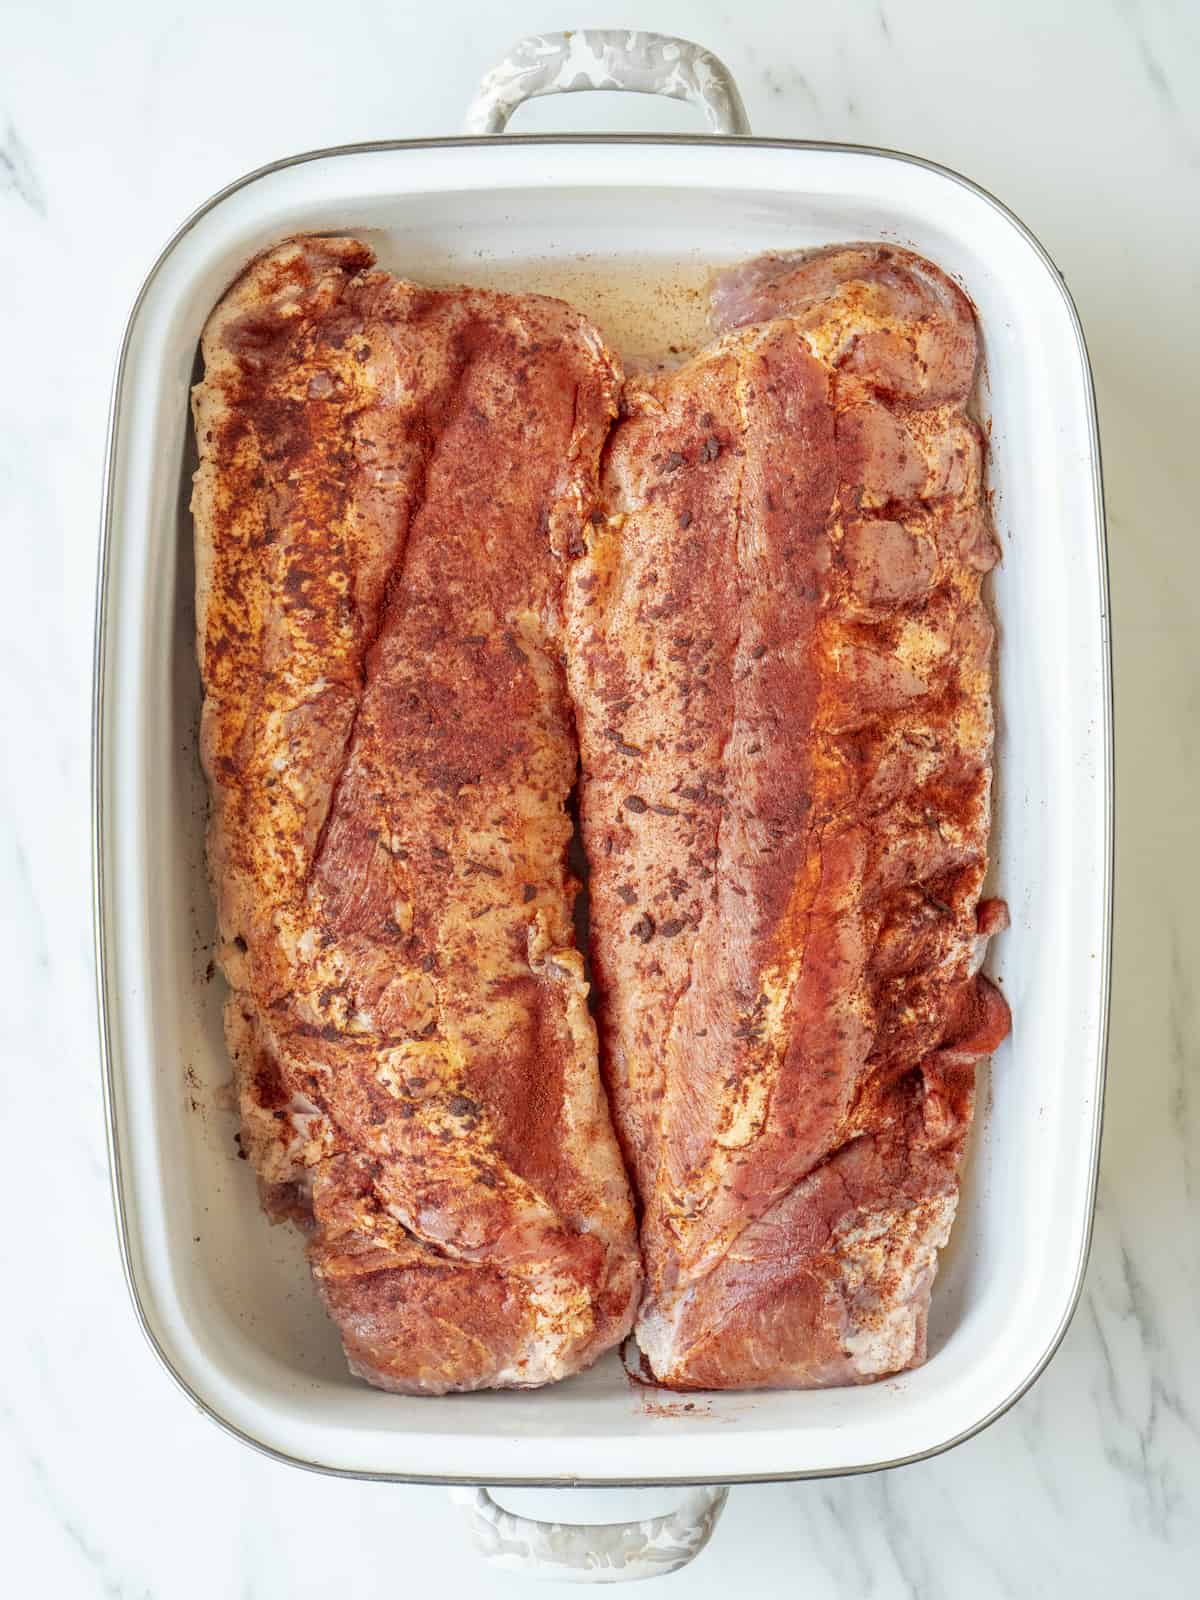 Large baking pan with ribs that have been pat dry and rubbed with chili powder.